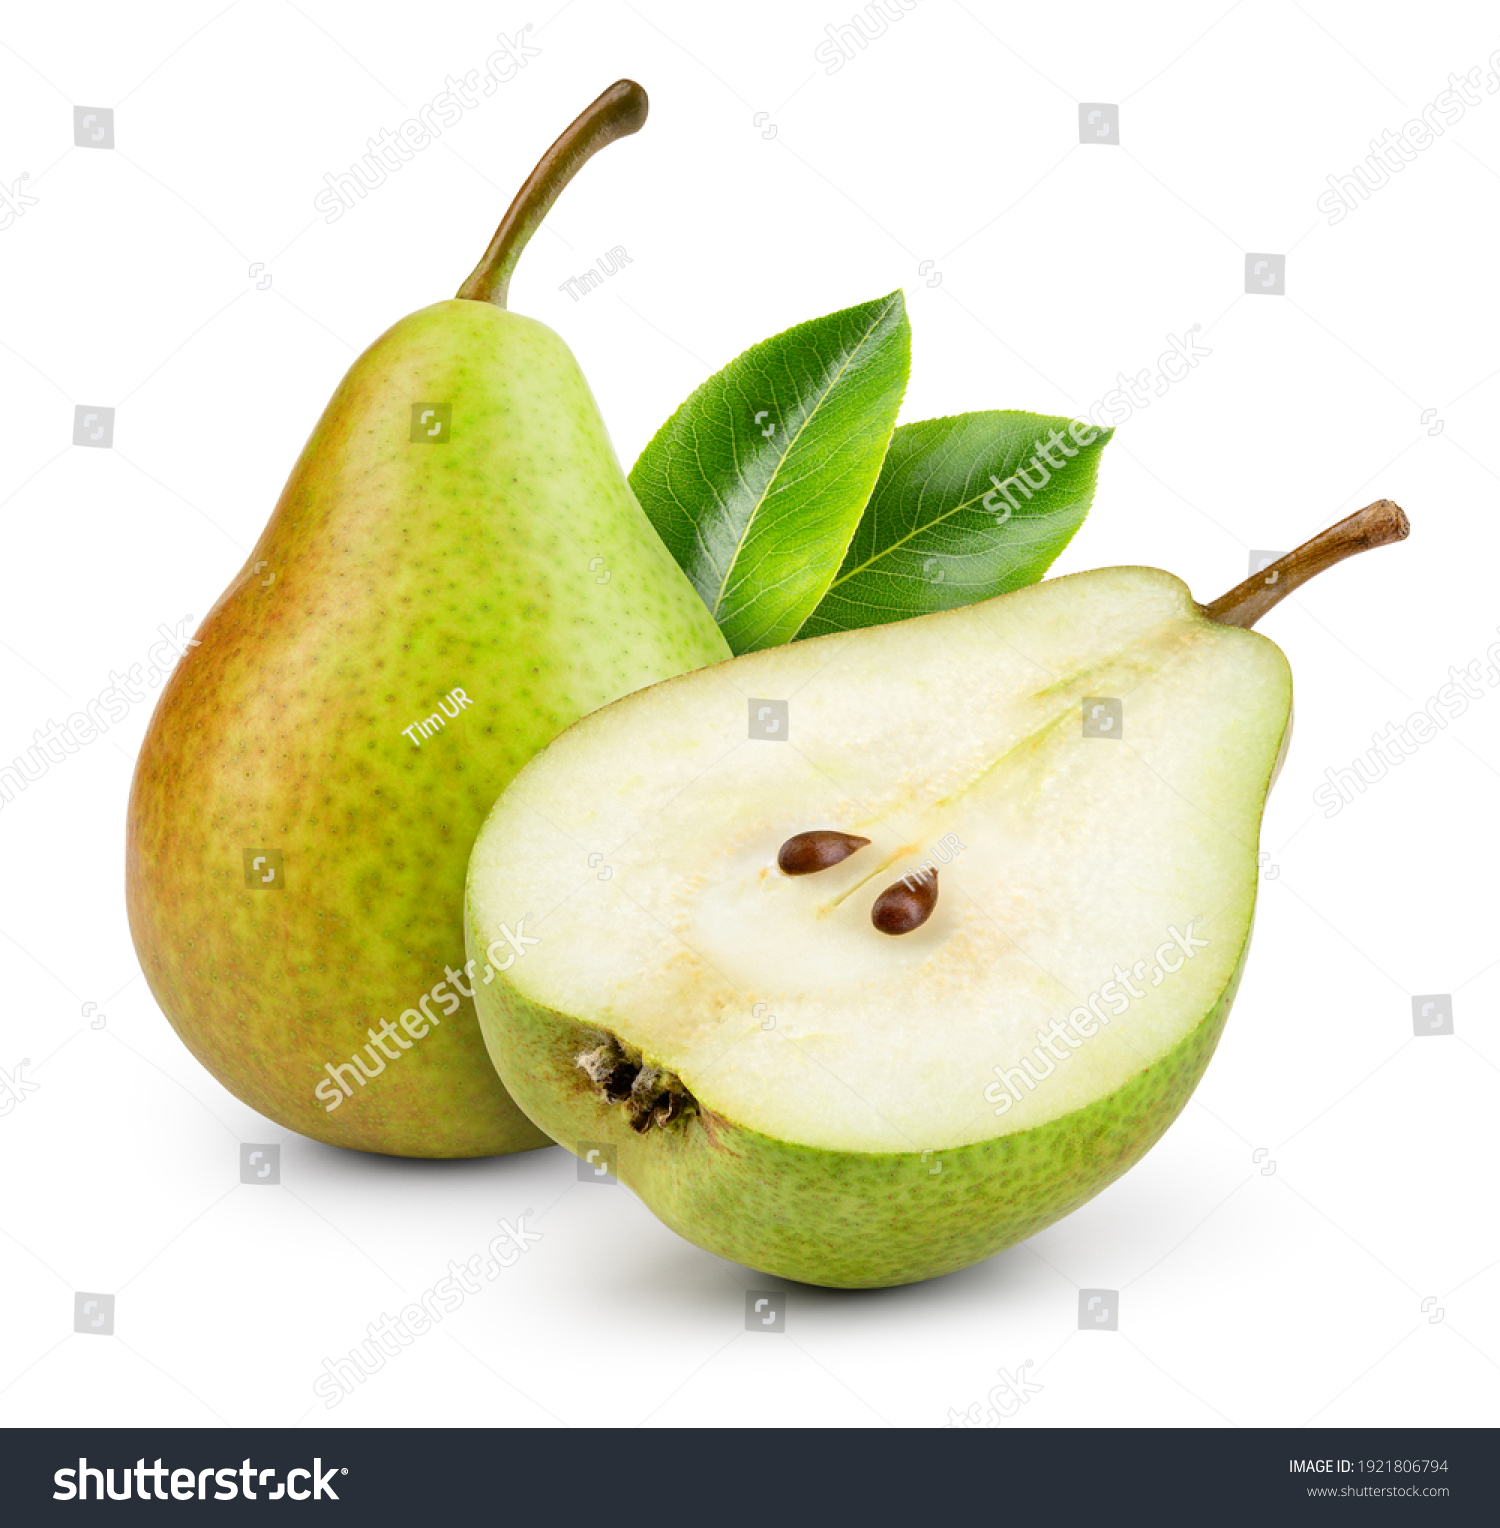 Pears isolated. One and a half green pear fruit with leaf on white background. With clipping path. Full depth of field.  #1921806794